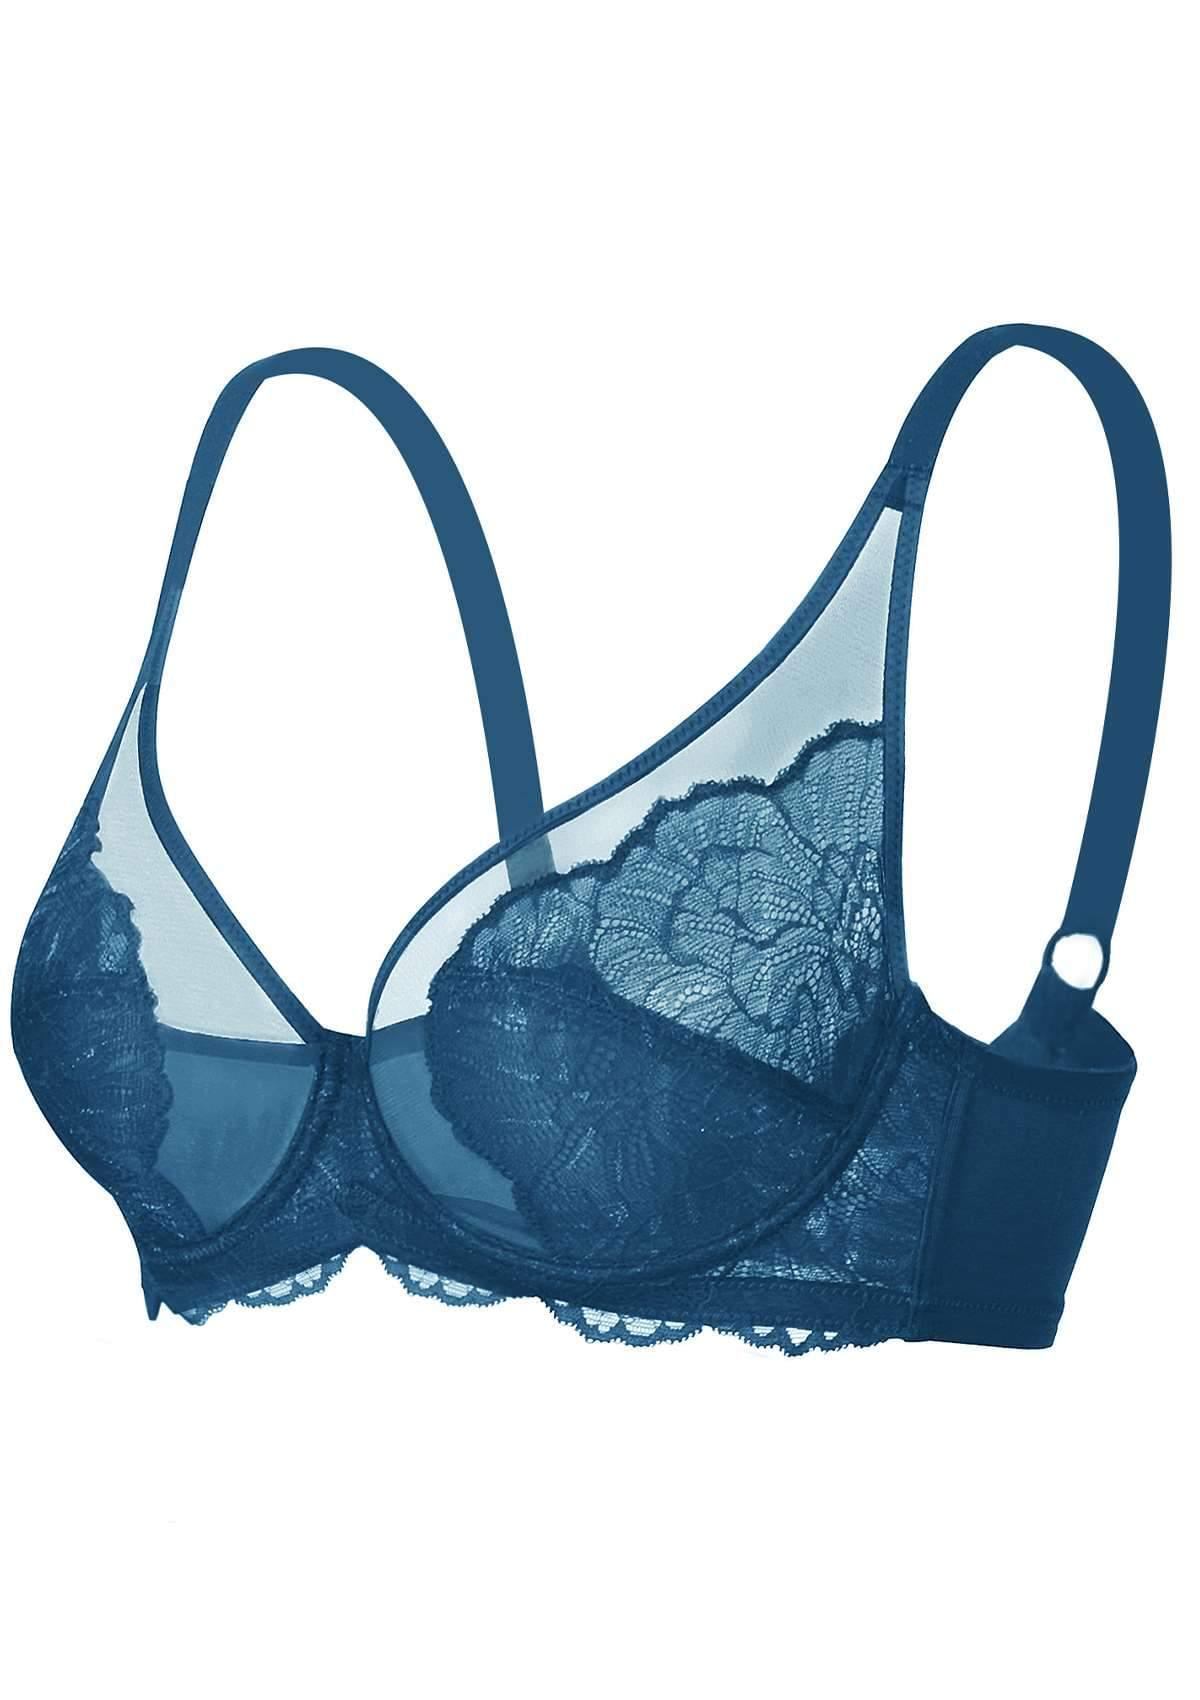 HSIA Blossom Lace Bra And Underwear Sets: Comfortable Plus Size Bra - Biscay Blue / 42 / D